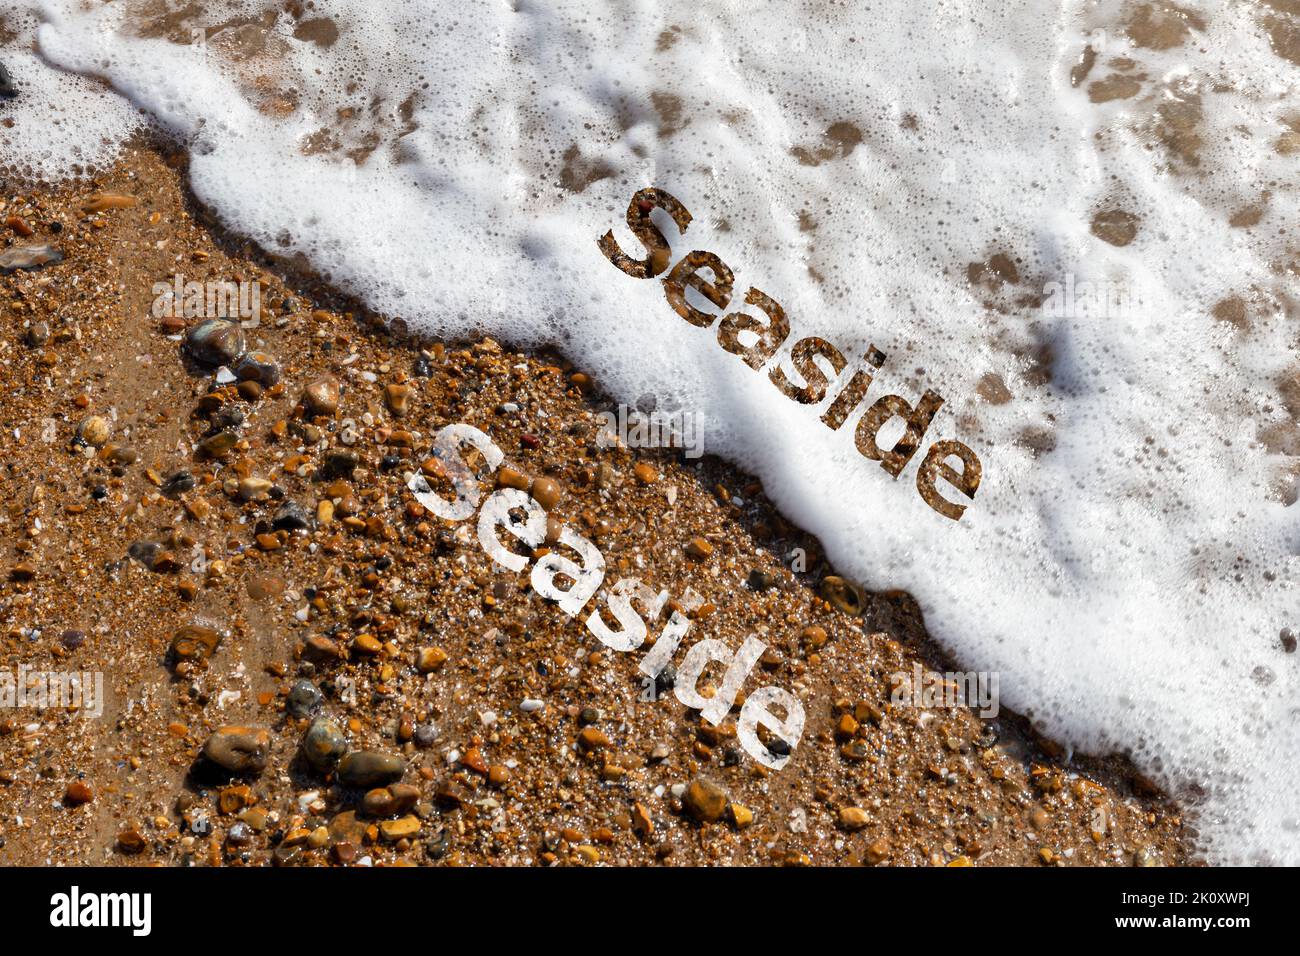 Seaside text cut out on both pebble beach and lapping waves  Stock Photo